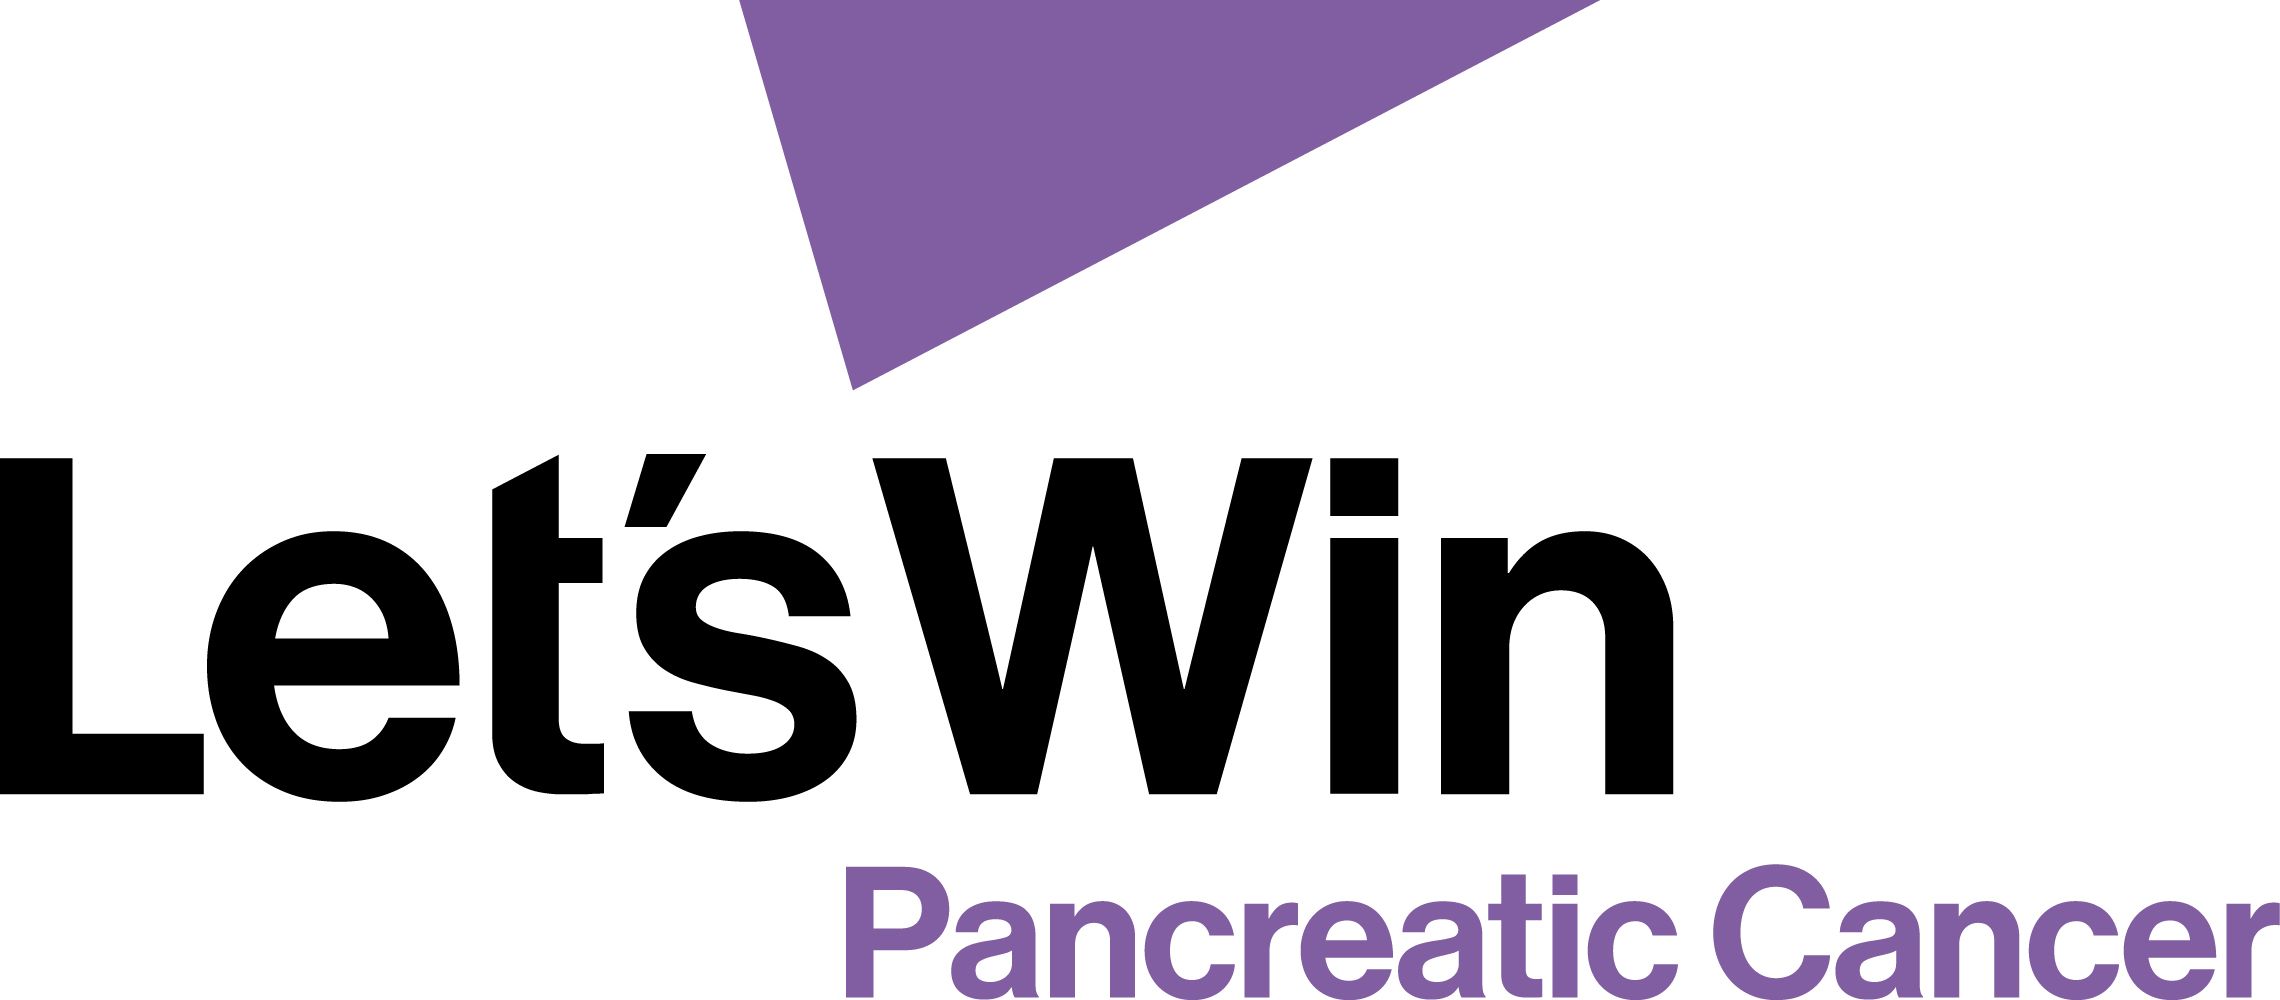 Let's Win! Pancreatic Cancer Foundation logo